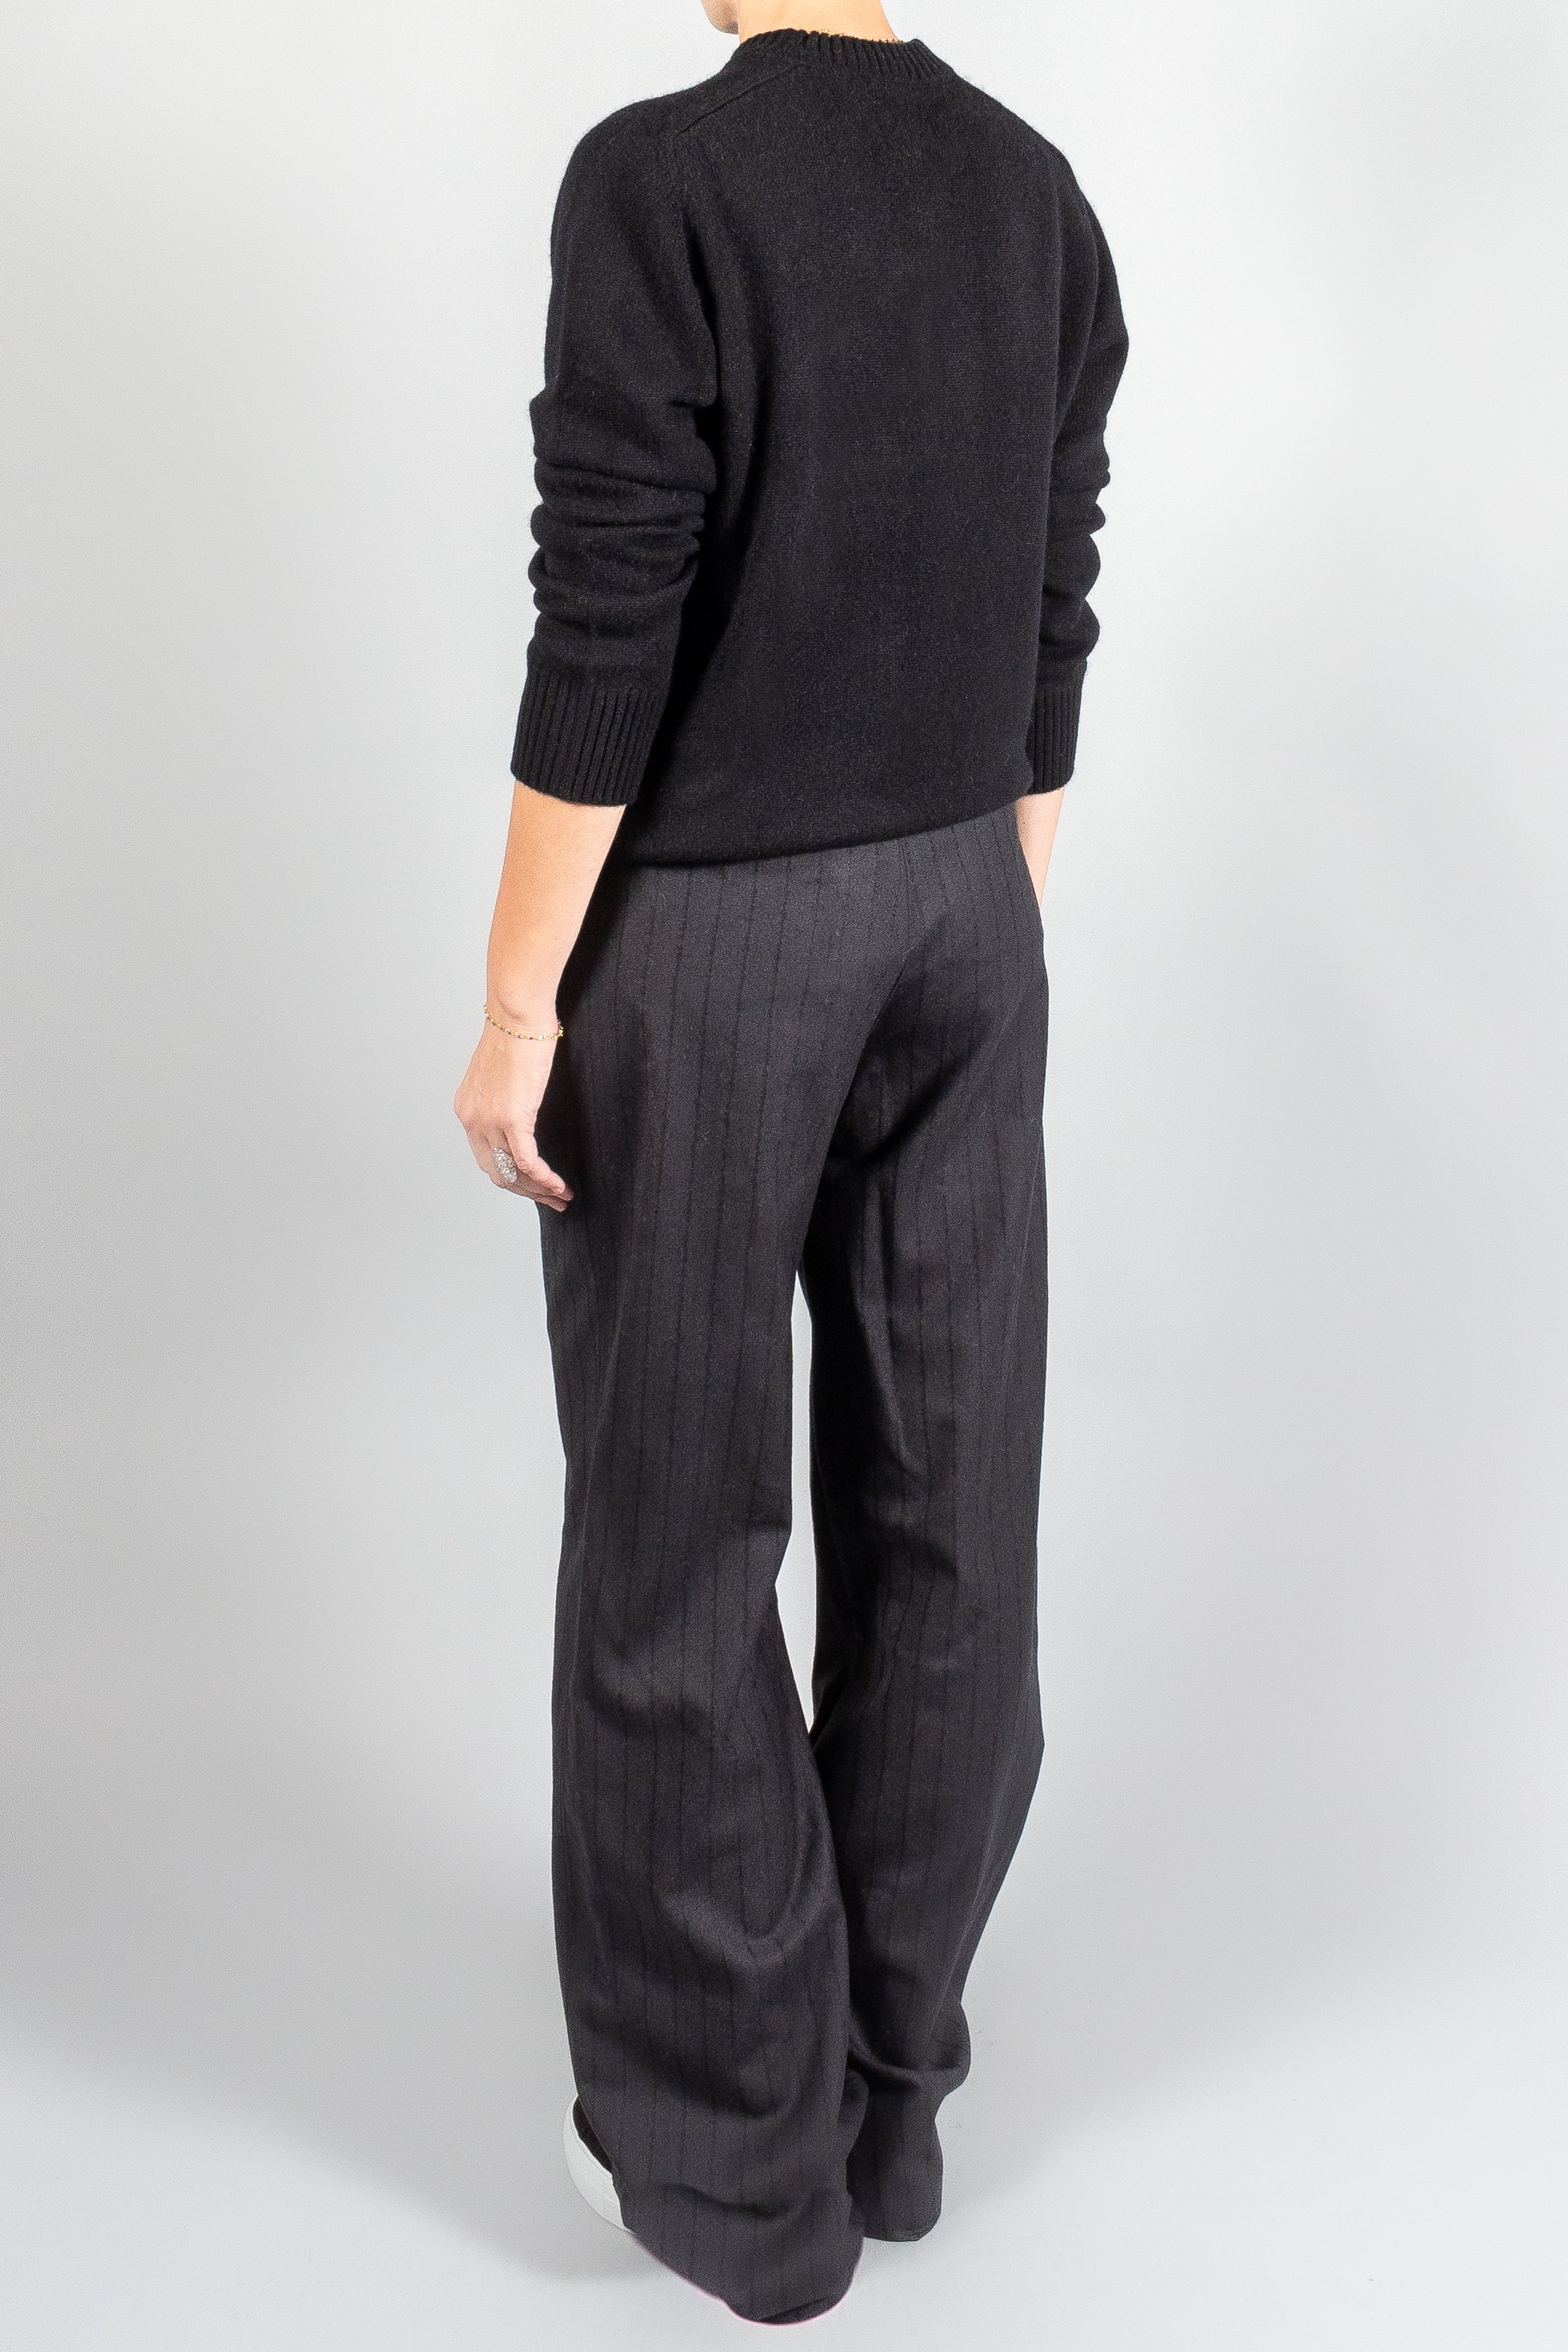 Loulou Studio Avira Pants-Pants and Shorts-Misch-Vancouver-Canada